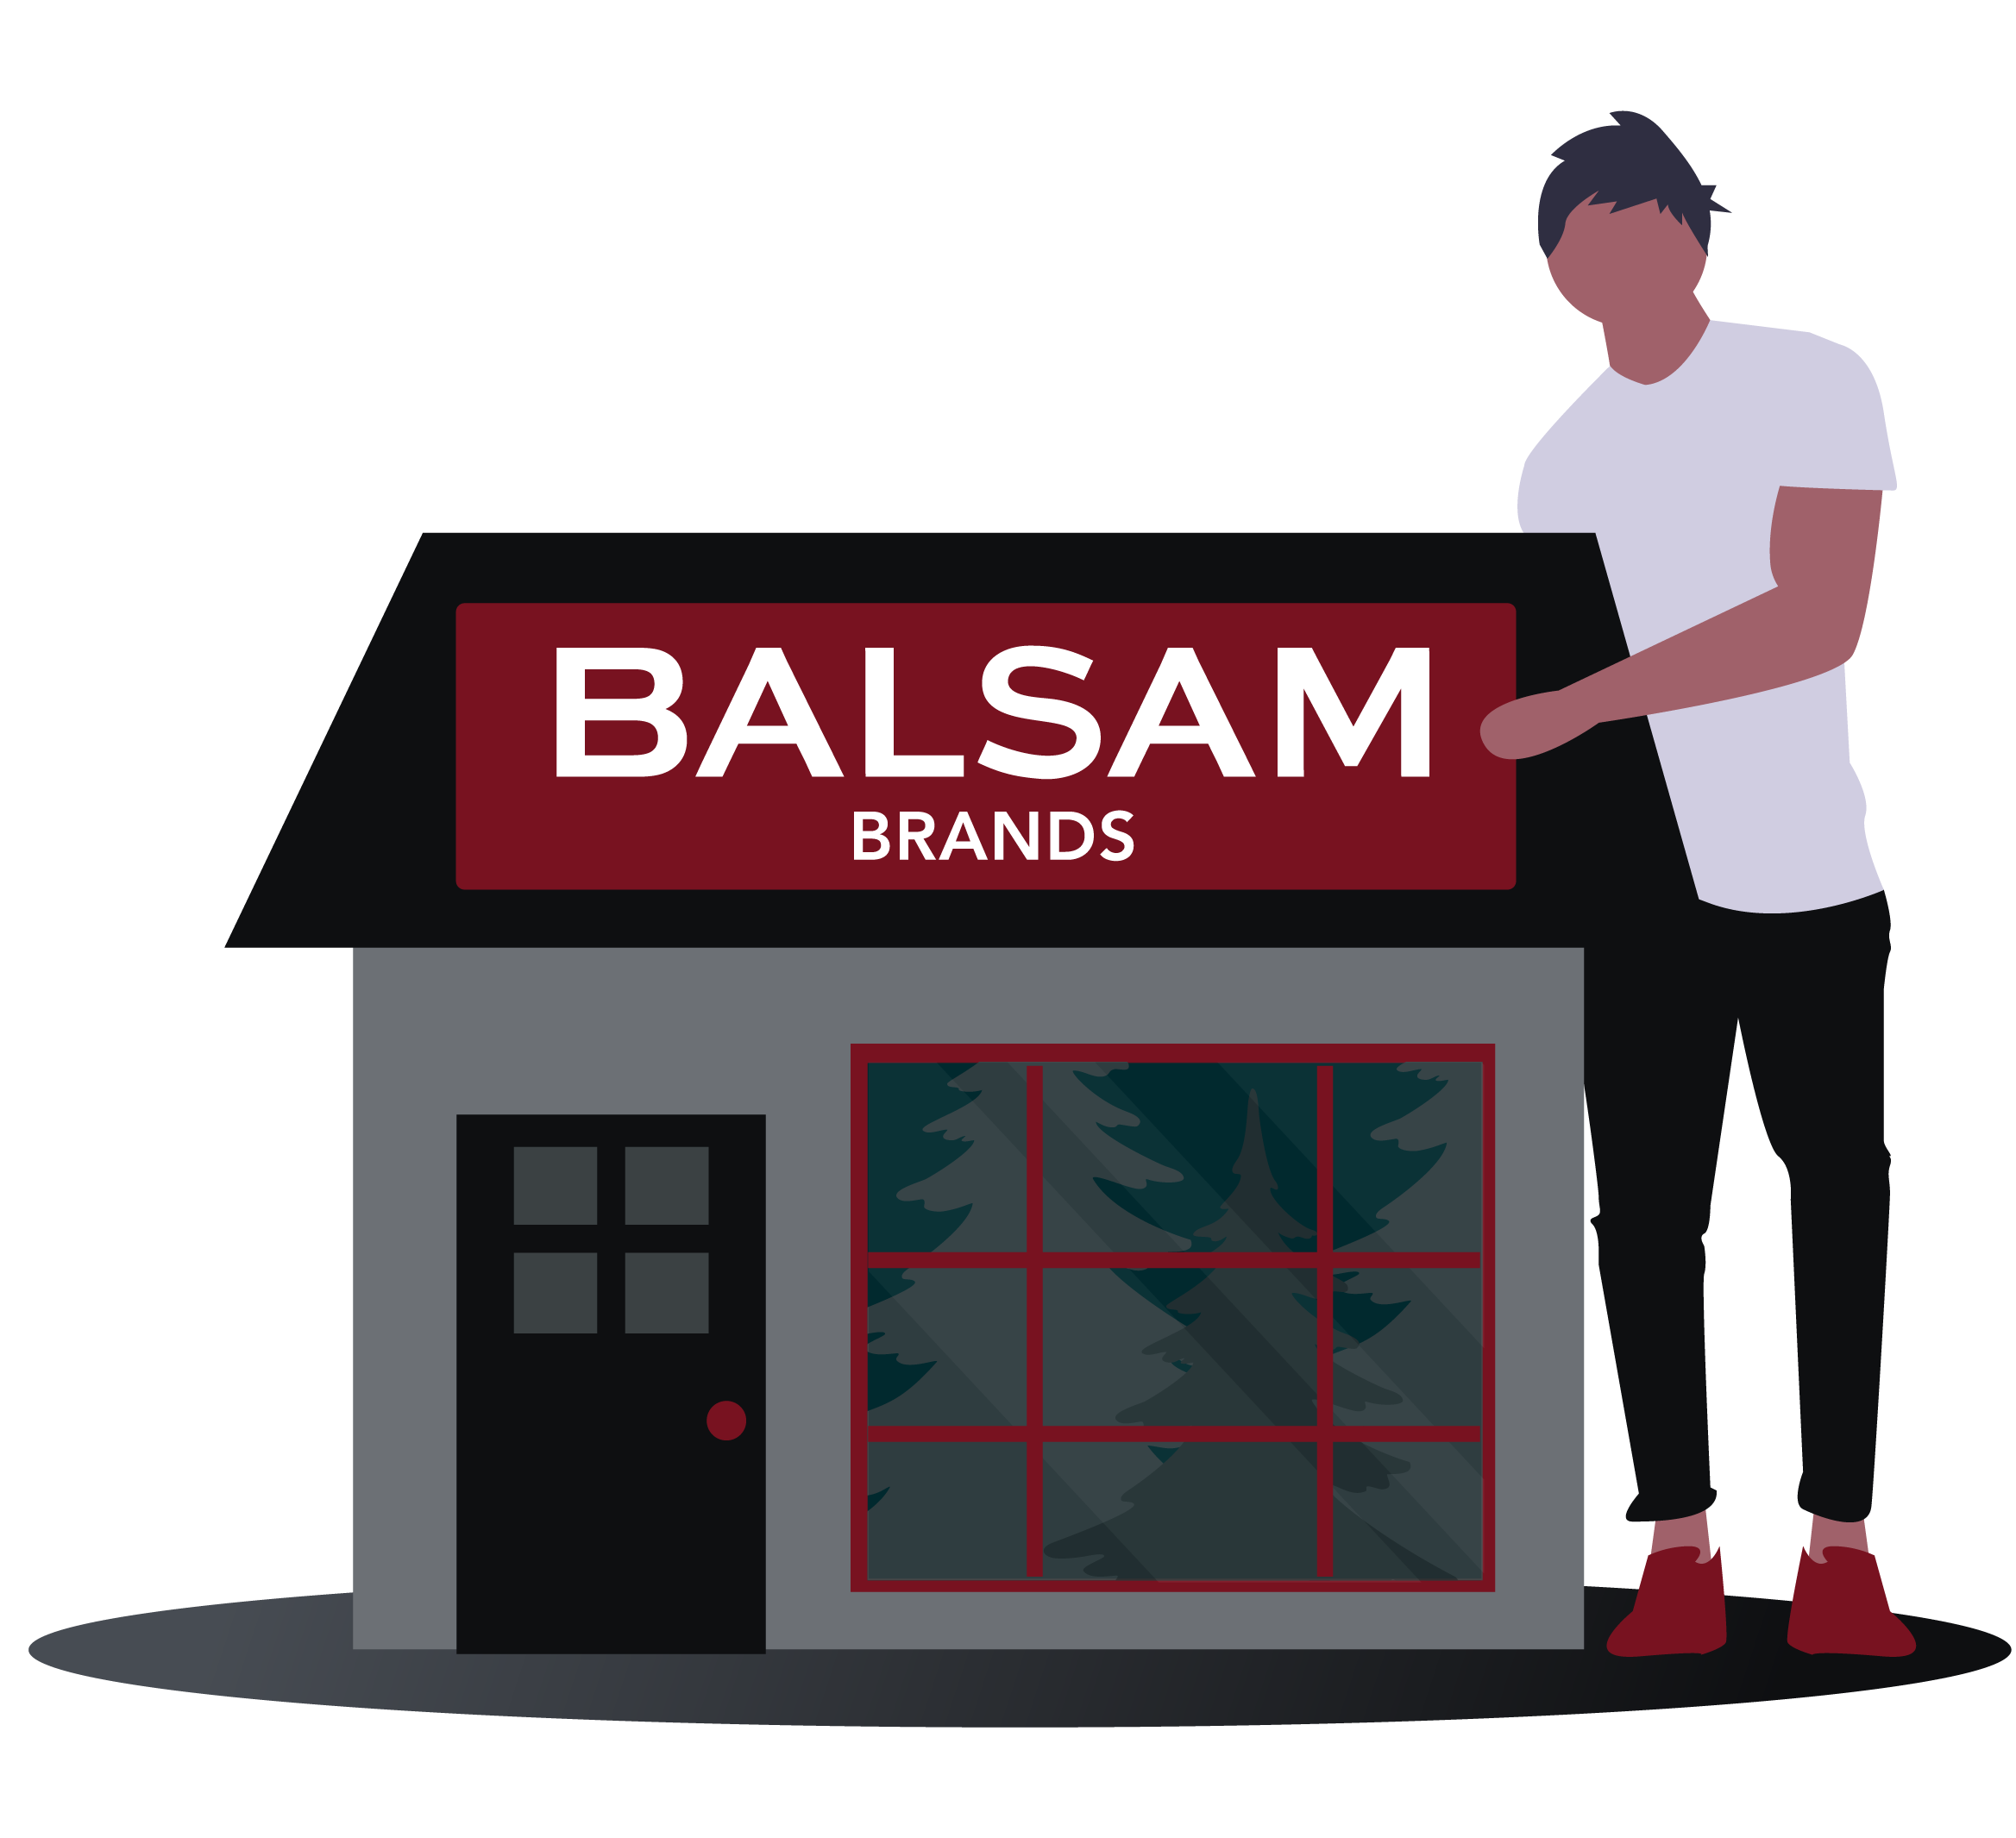 The client - About Balsam Brands